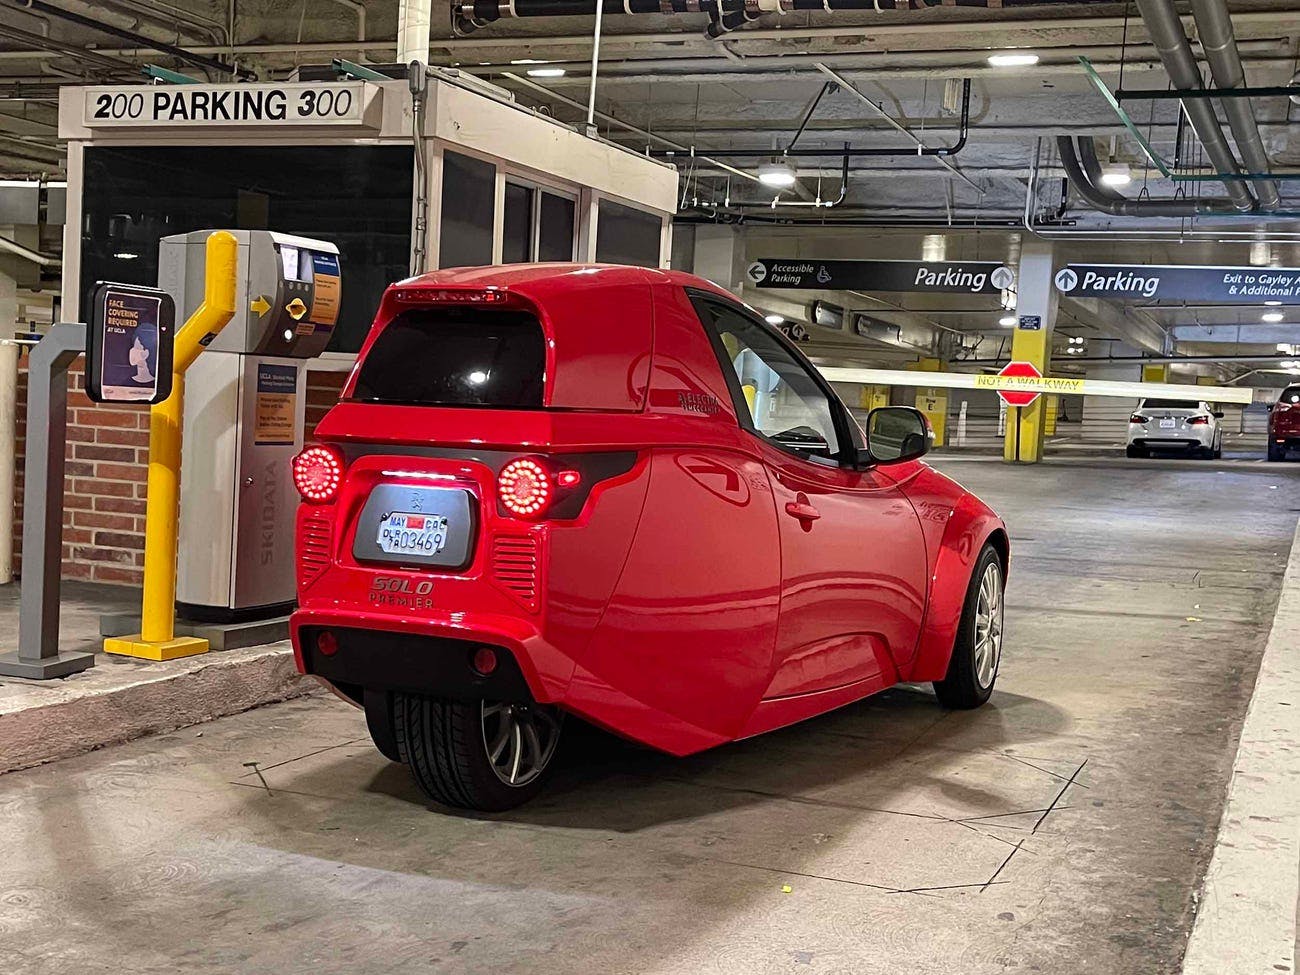 Business Insider - I drove a 3-wheeled, one-seater electric vehicle on a mini road trip through Southern California and I'm convinced it could change how we get from A-to-B